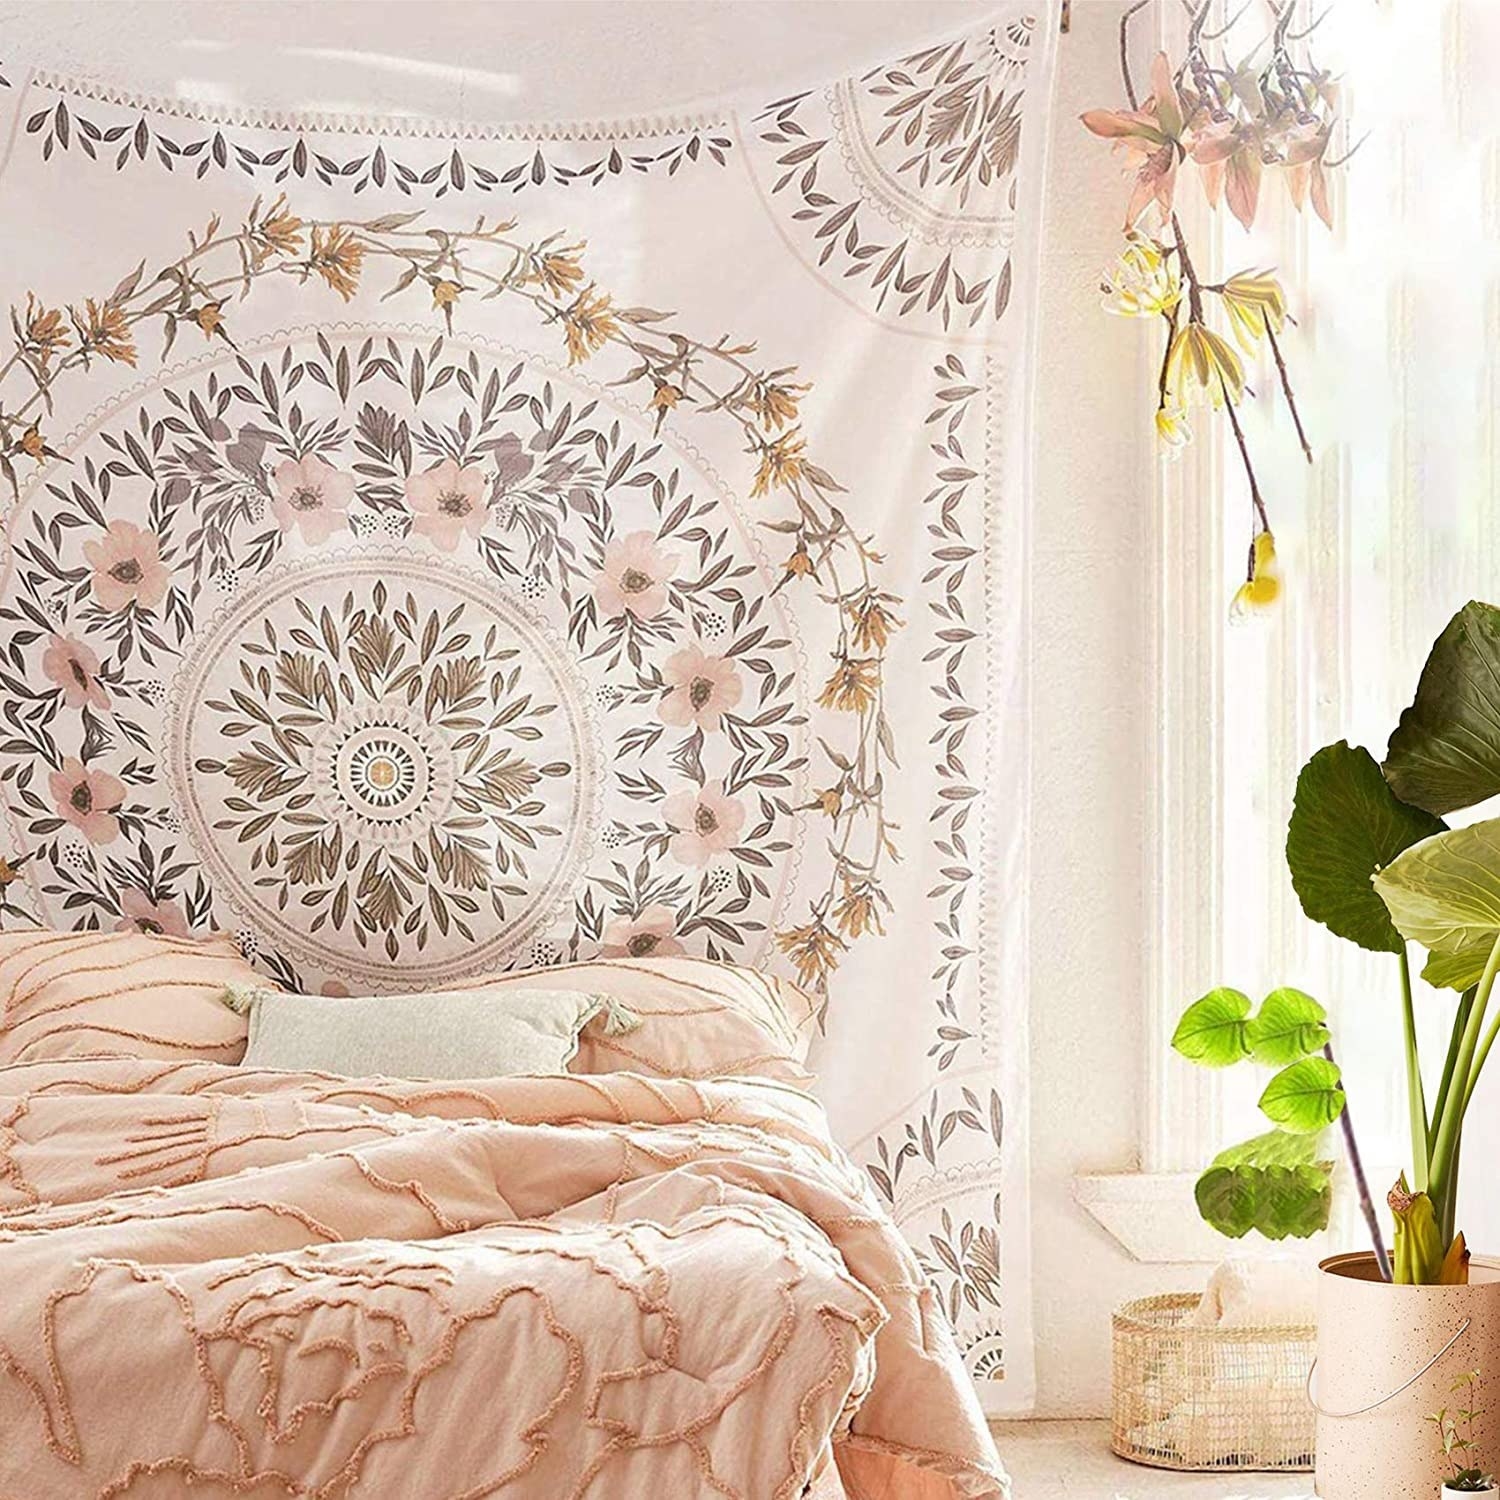 a floral wall tapestry hung on a wall behind a bed